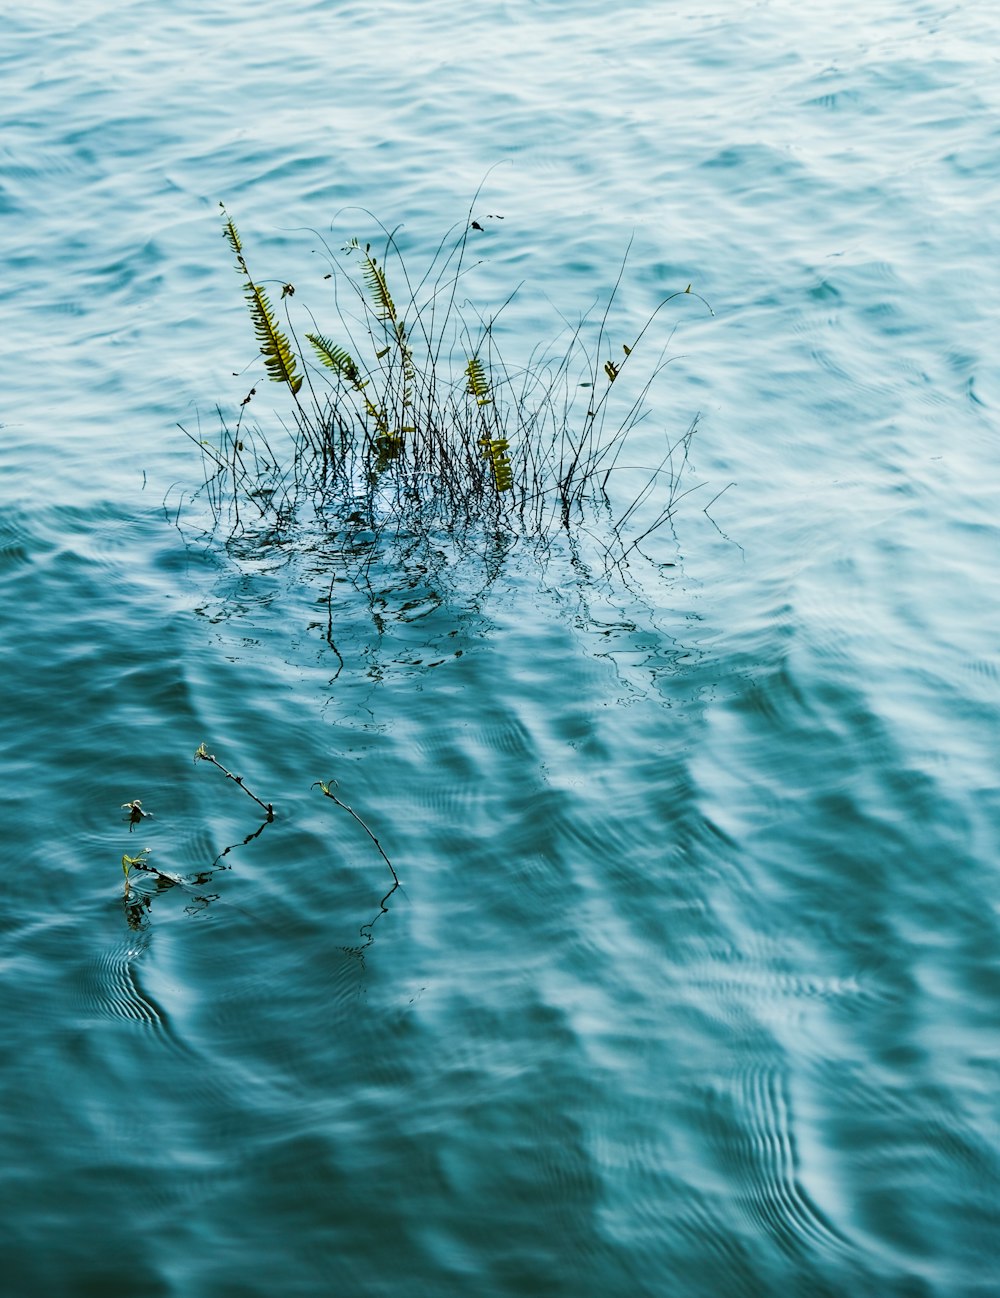 a plant floating in a body of water